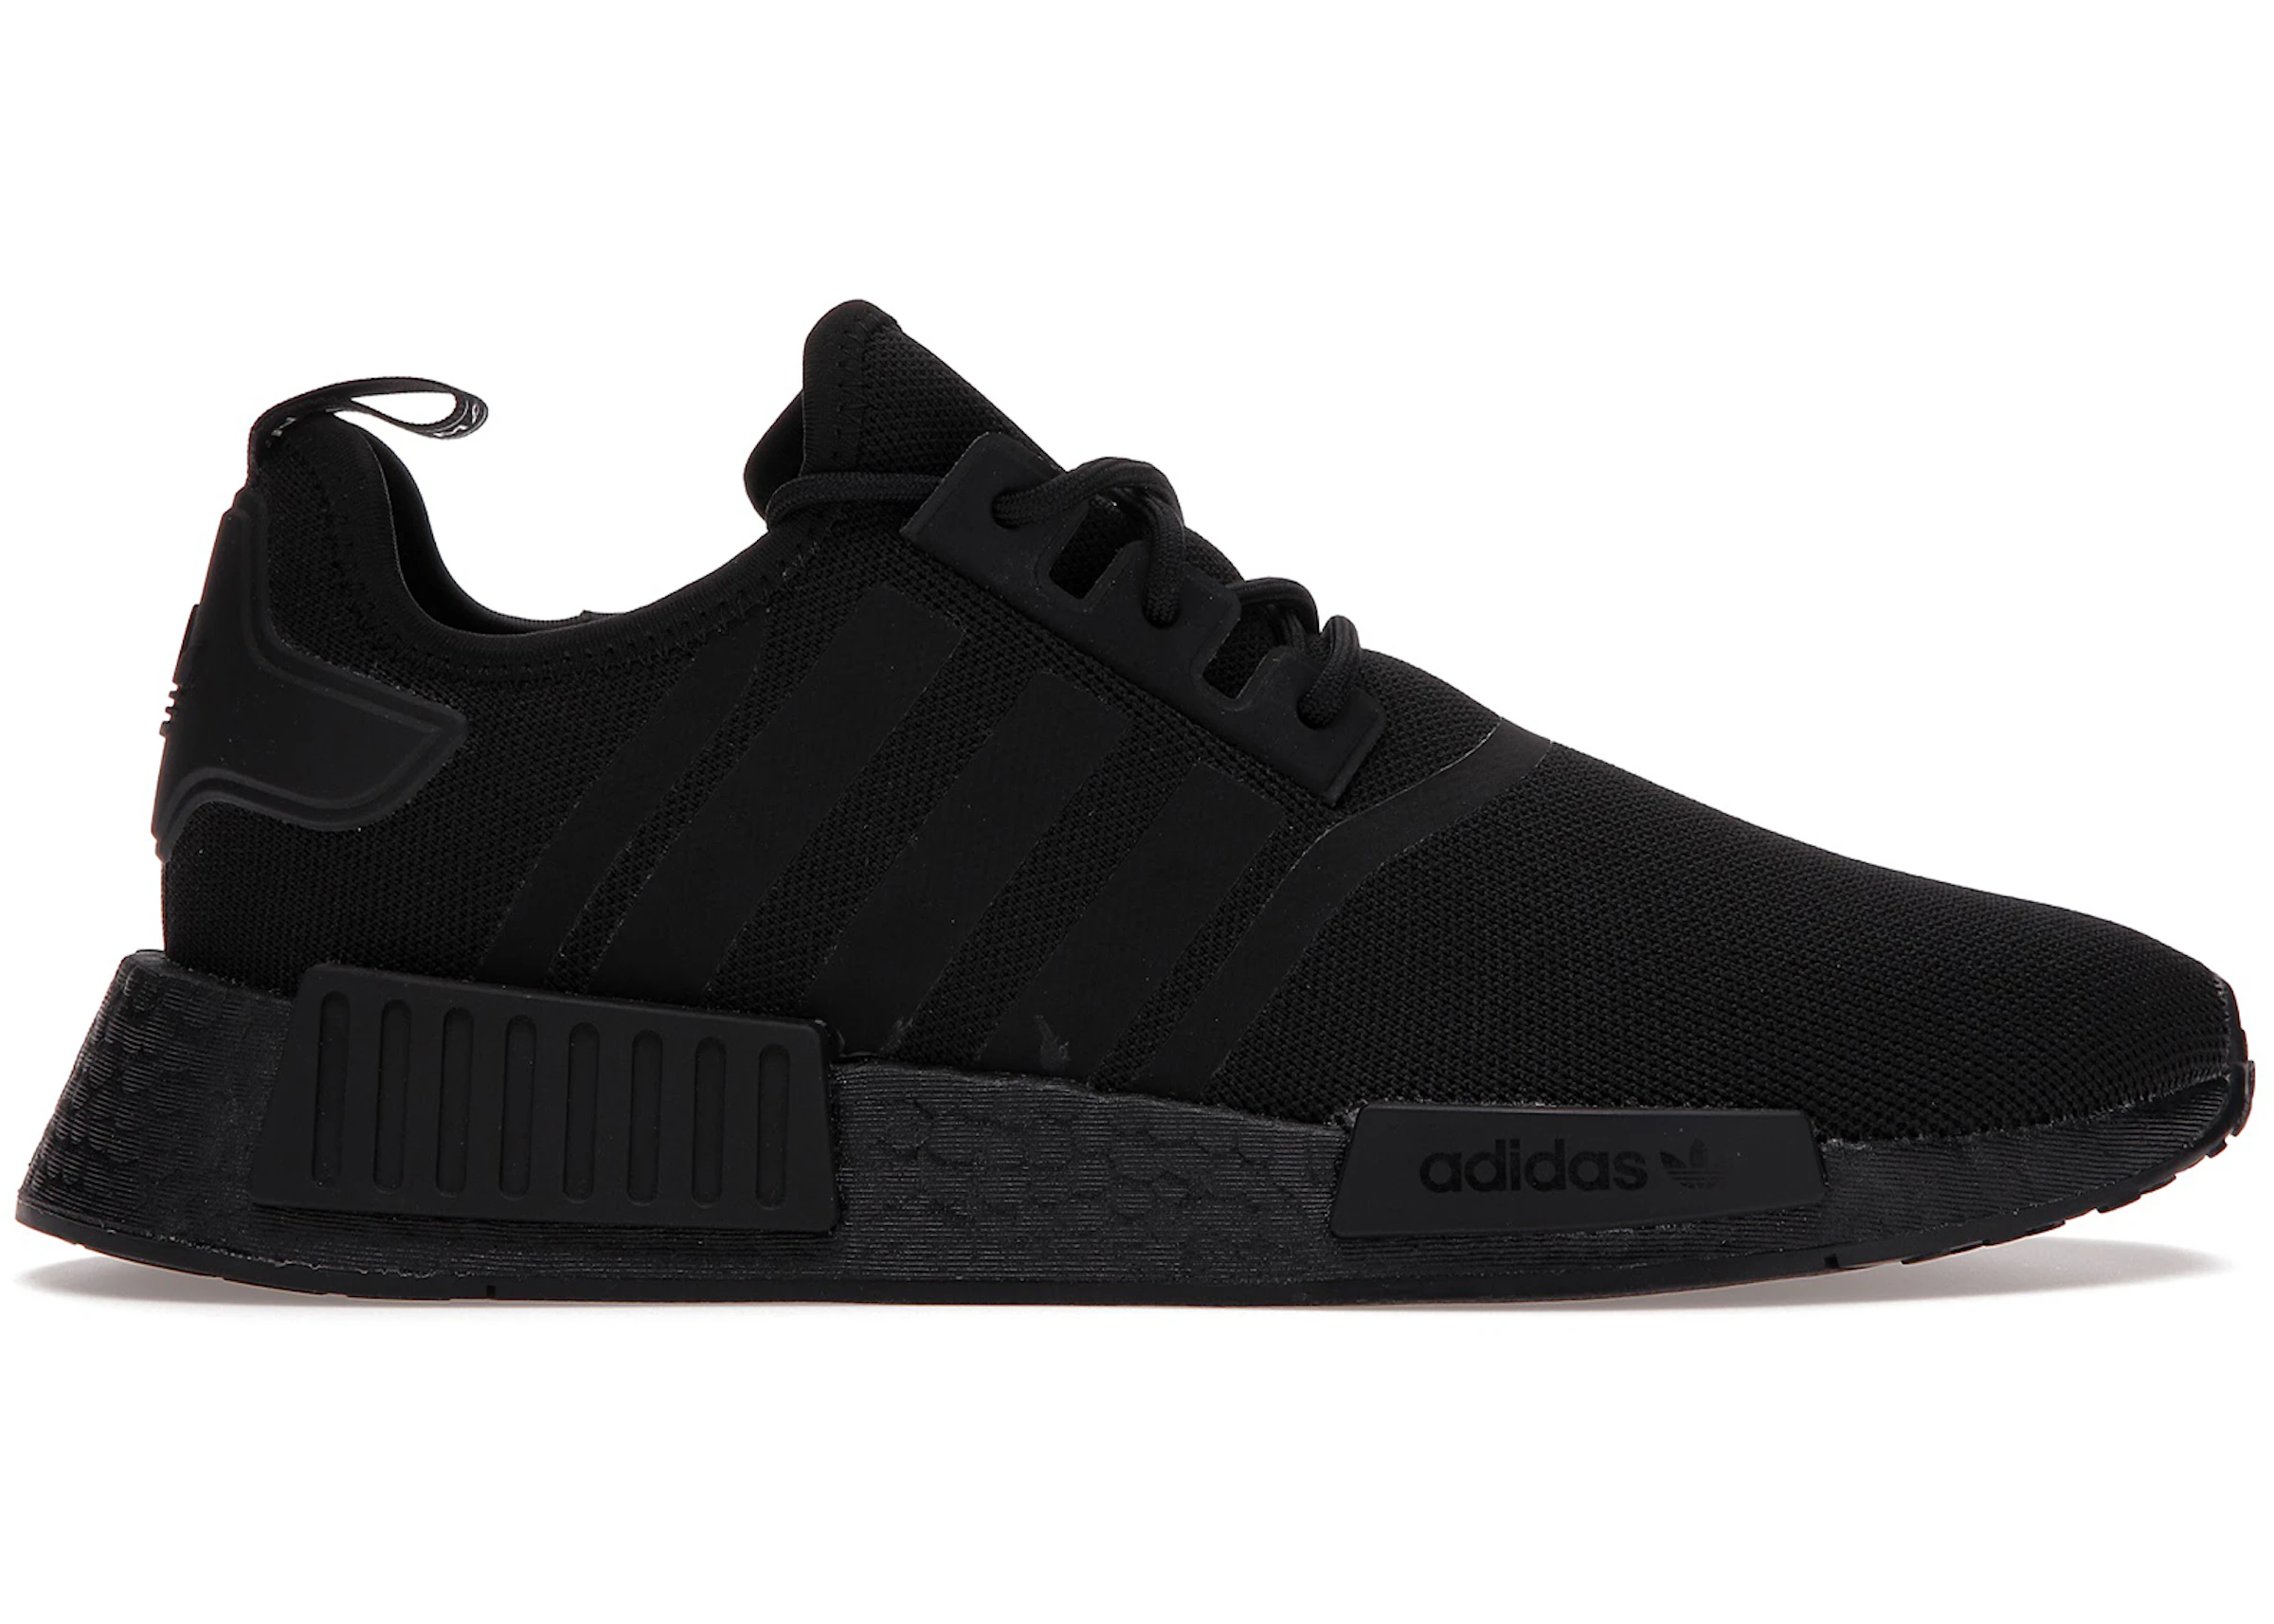 Where Can I Find Adidas Nmd Shoes?